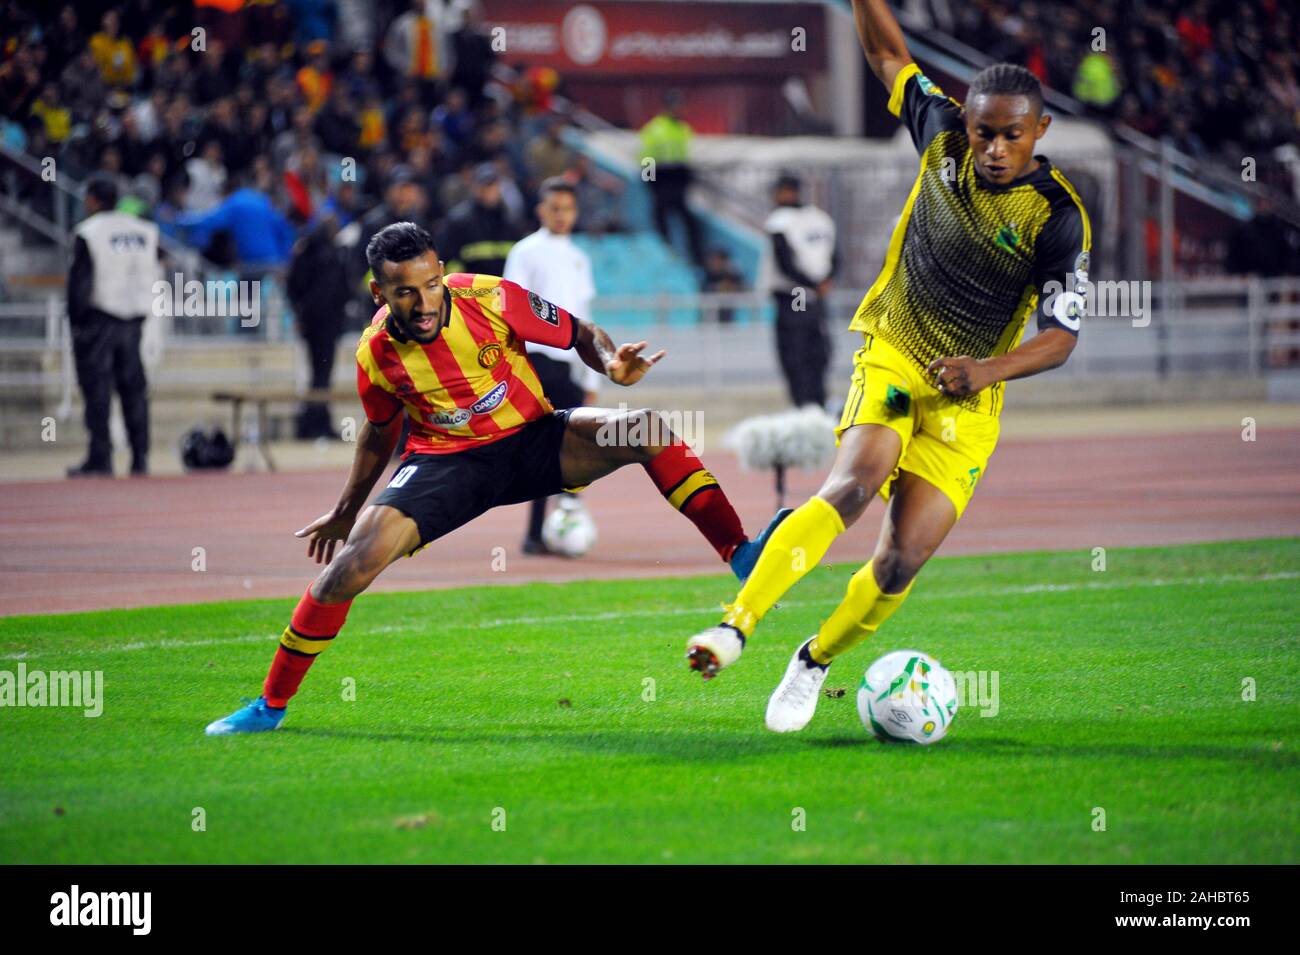 Rades, Tunis. 27th Dec, 2019. Mohamed El Houni of EST(10) and Bangala  Litombo(4) during the match EST (Tunisia) vs AS V Club (DR Congo) CAF Total  League of African Champions at Rades